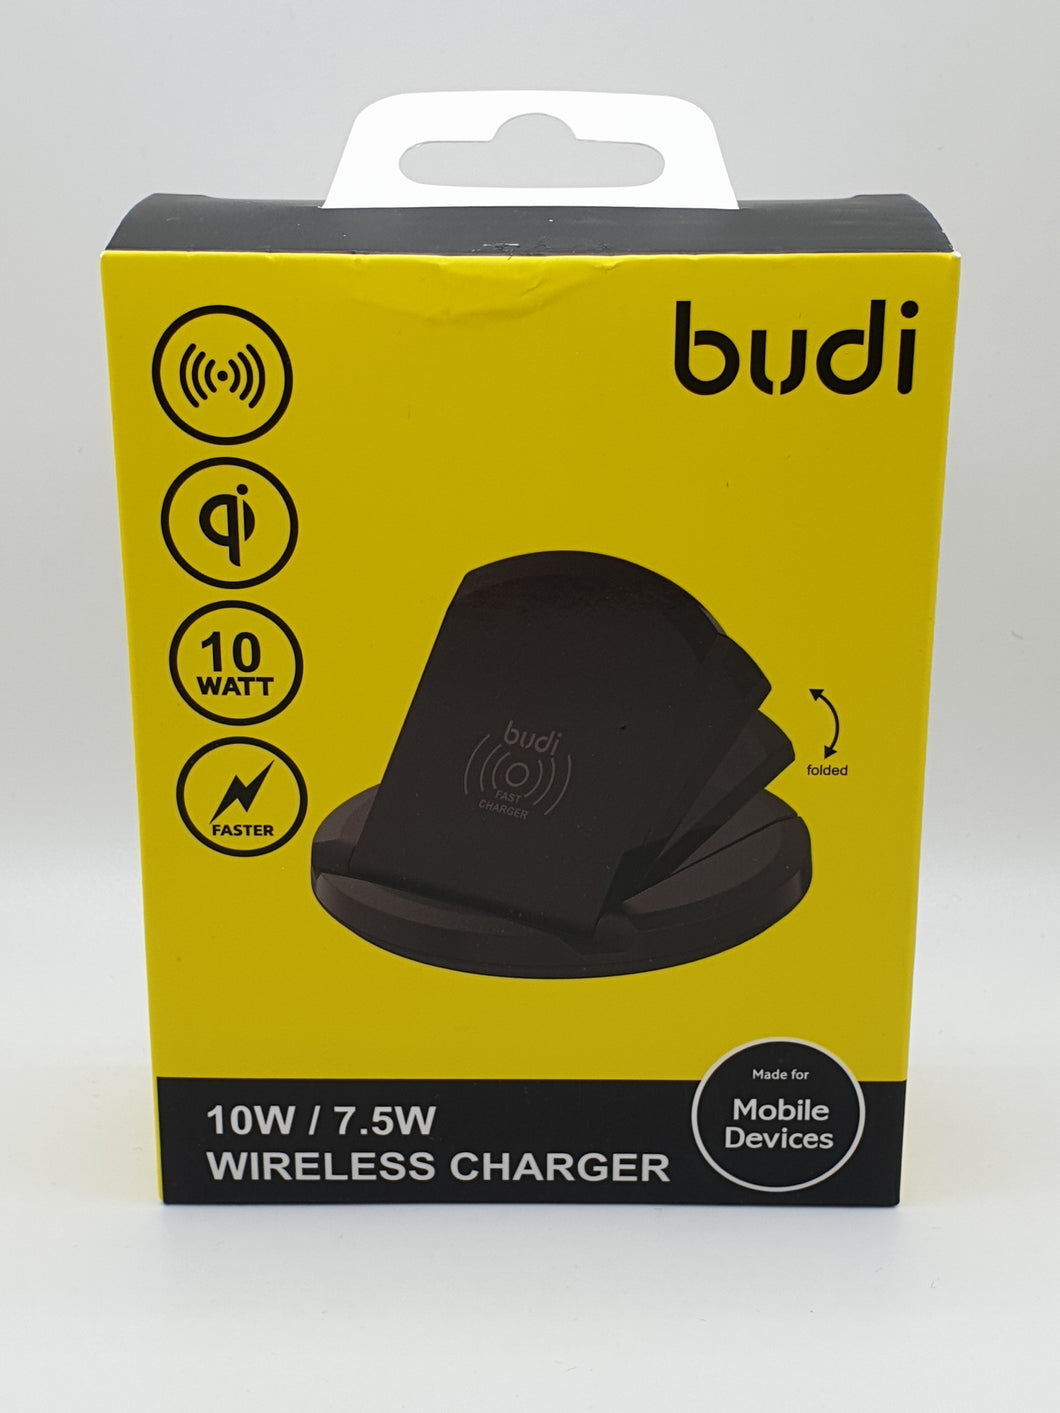 Budi Fast Wireless Charger Qi Devices Smartphones Android iOS Stand Folds Up